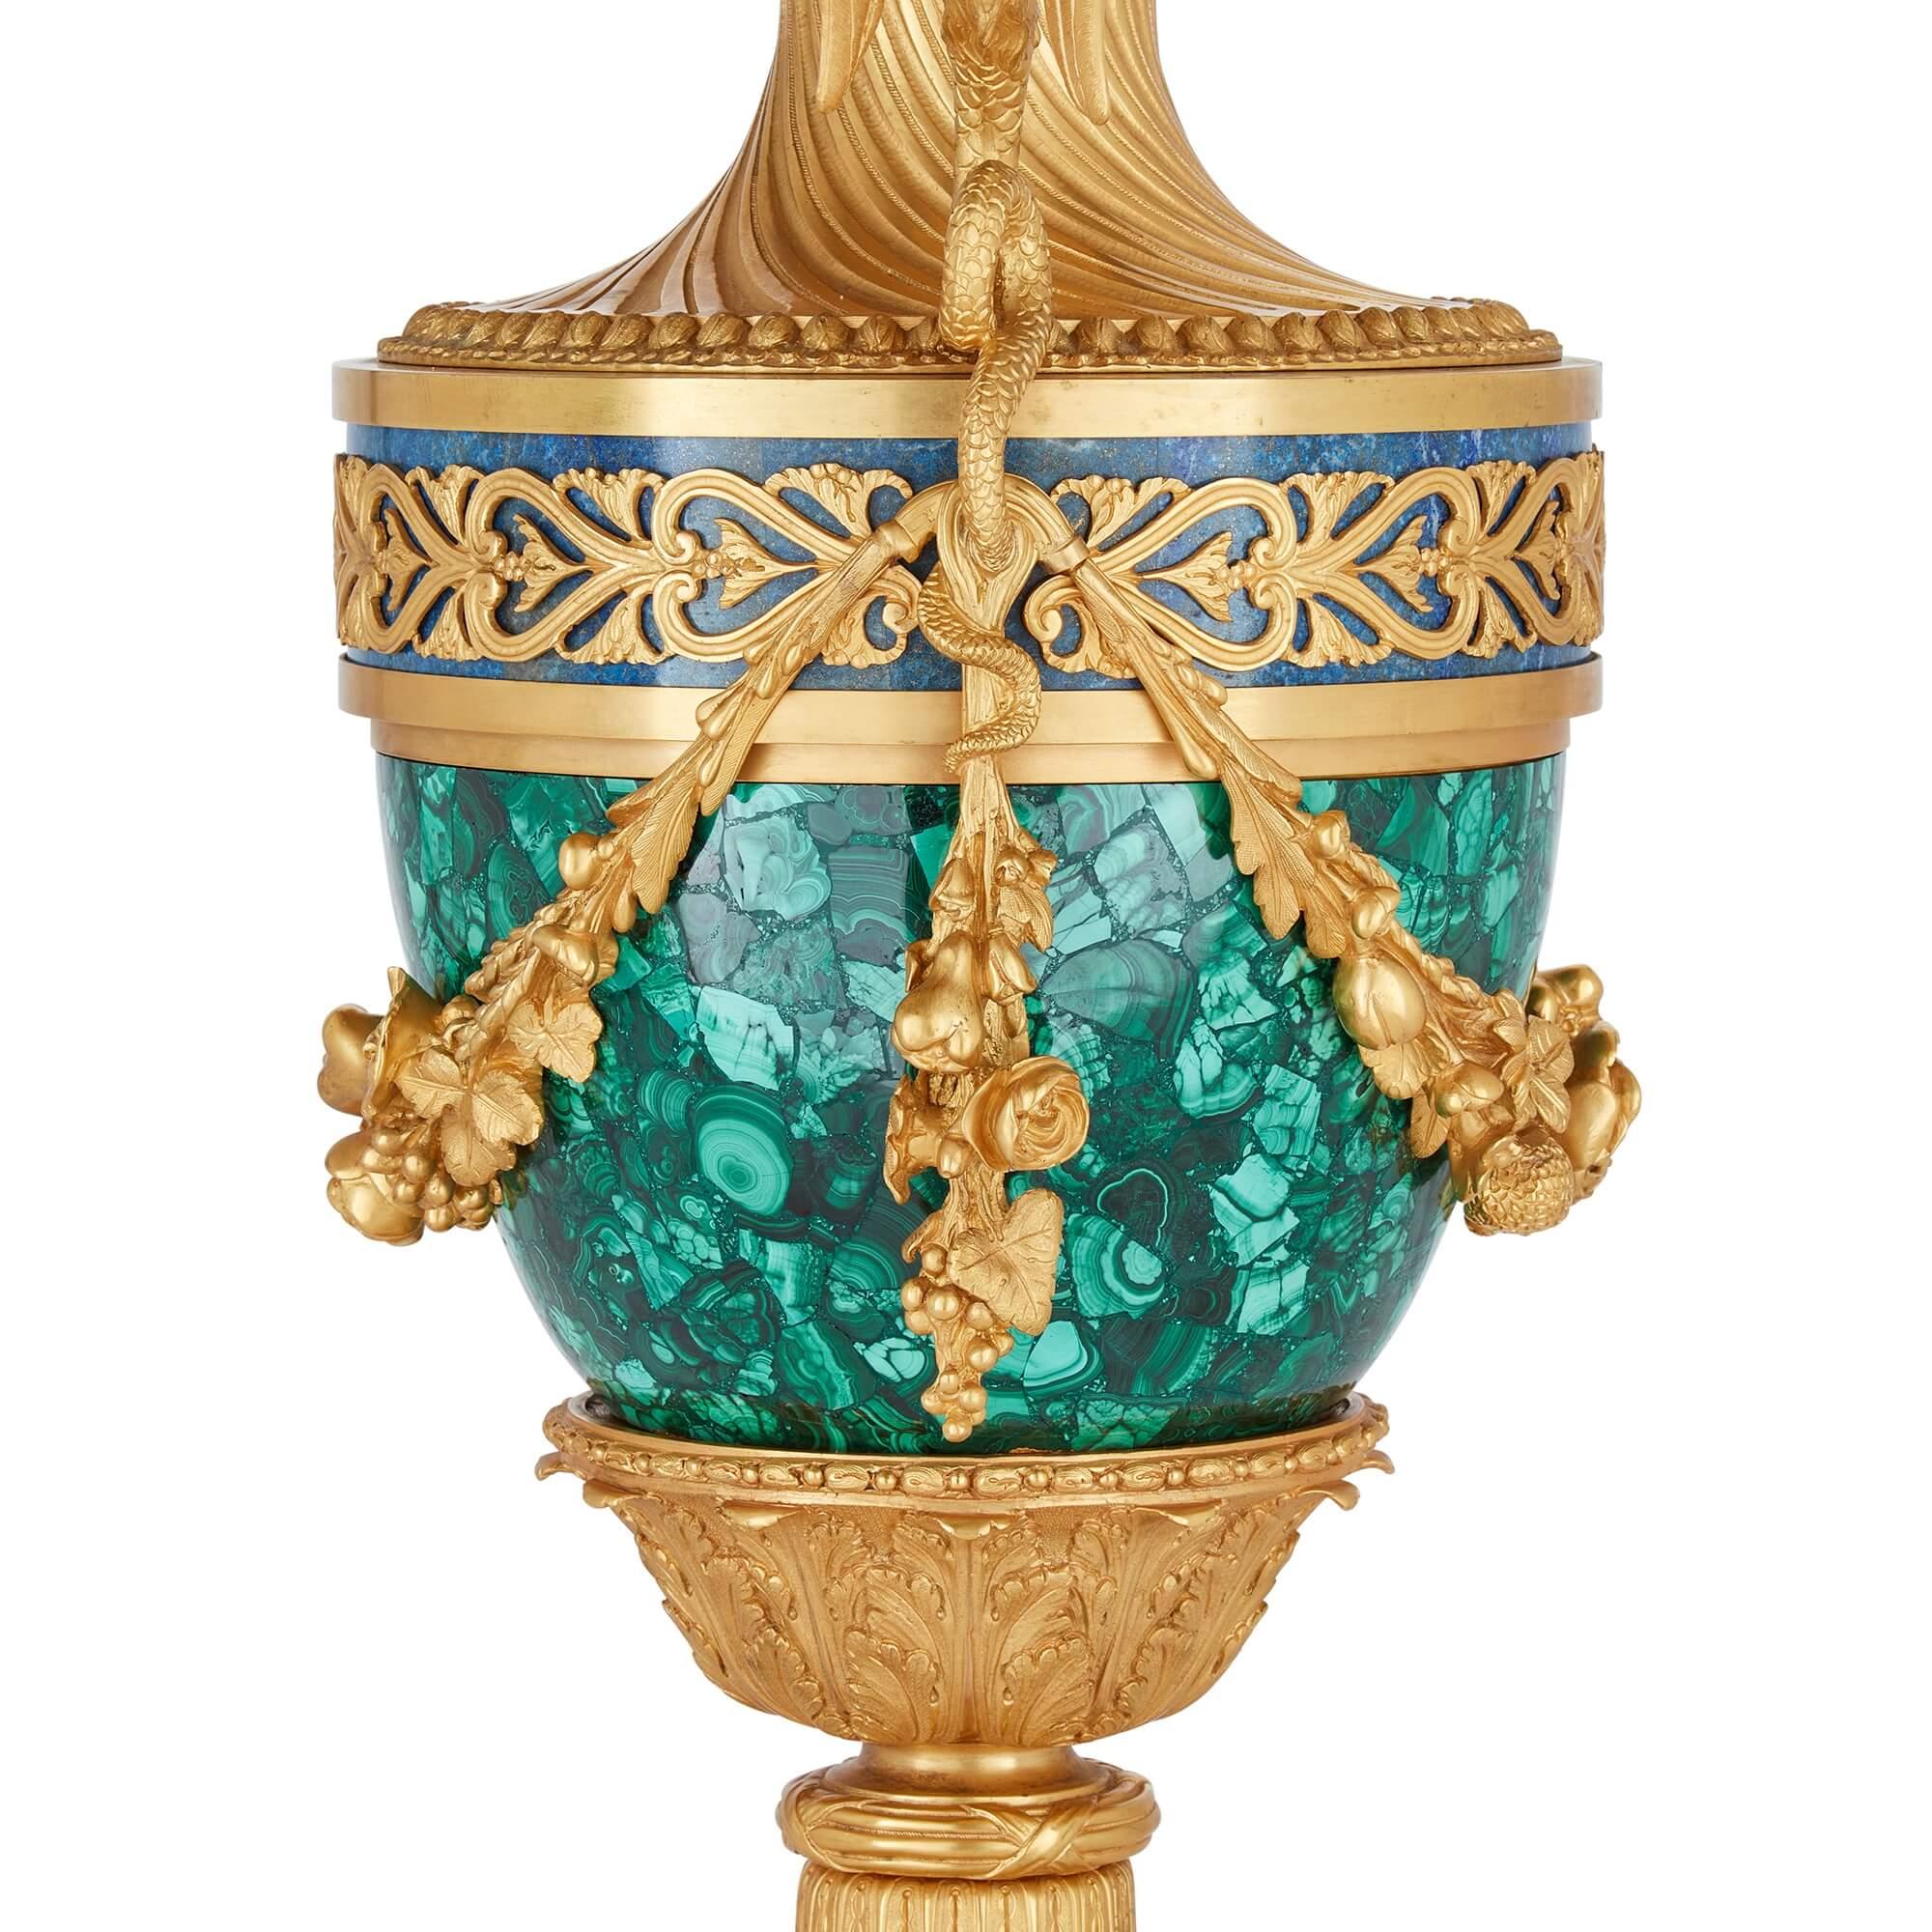 Pair of French Empire Style Malachite, Lapis Lazuli and Ormolu Vases For Sale 1